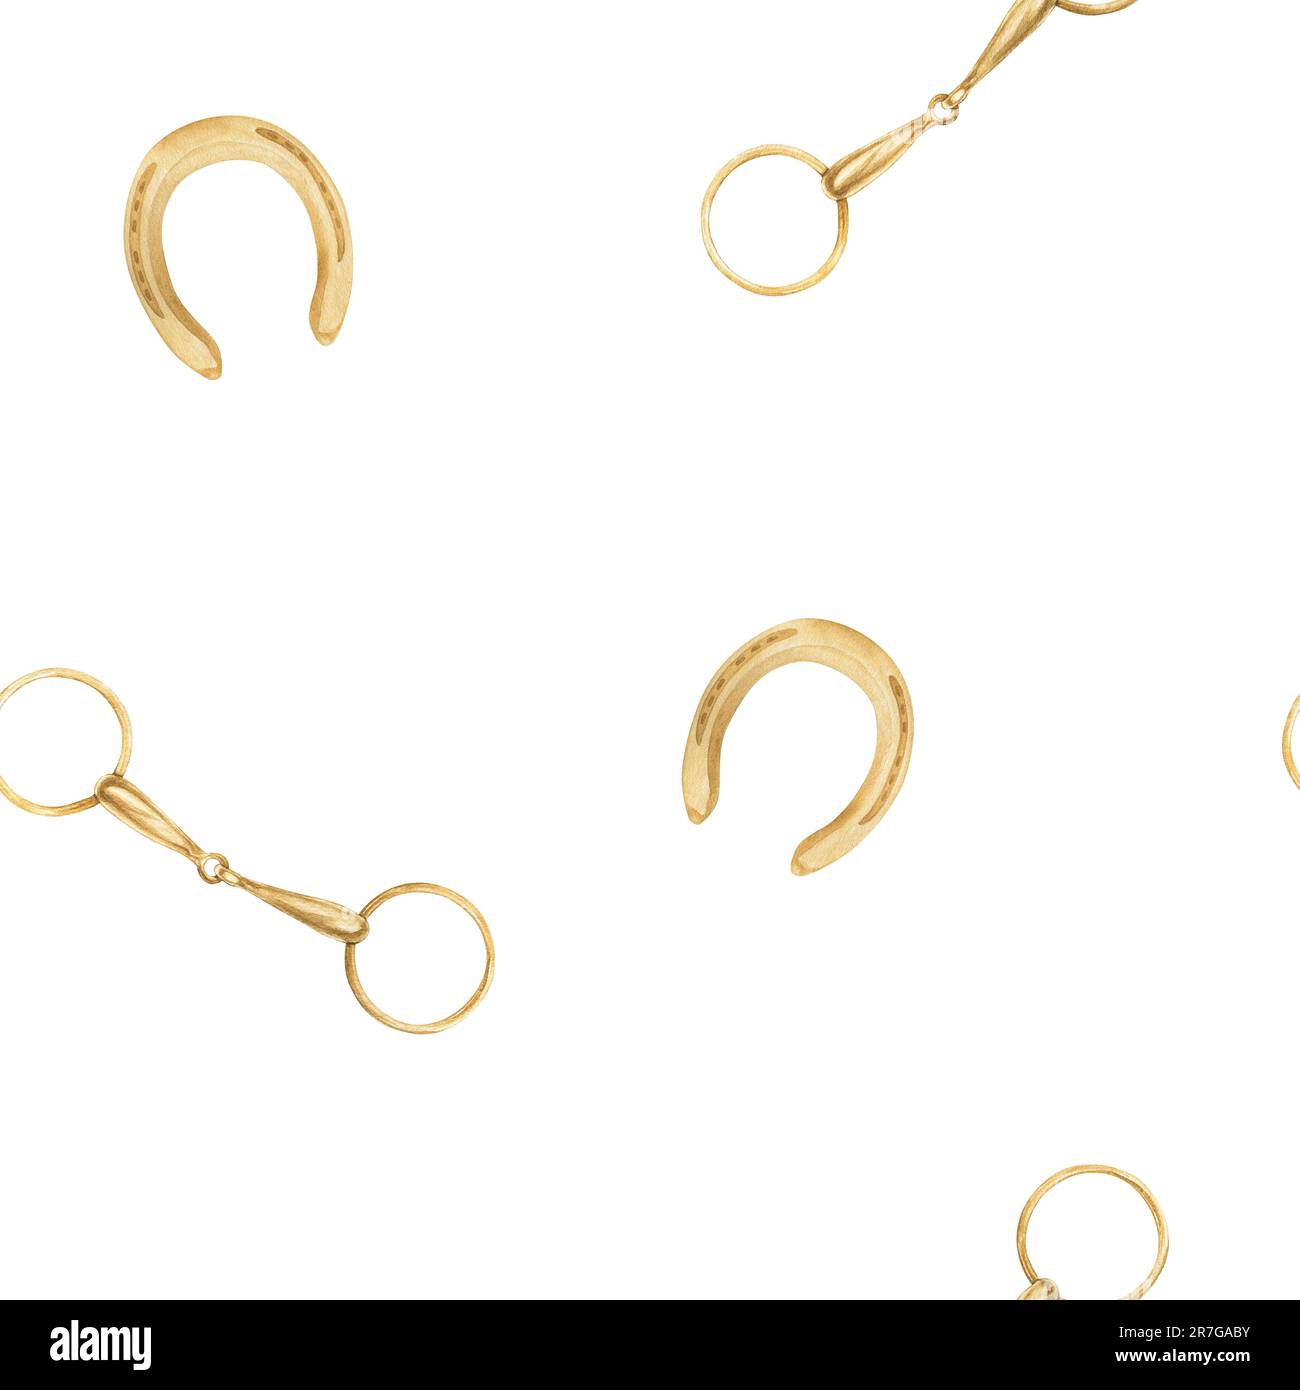 Seamless minimalistic pattern with watercolor illustrations of golden horseshoes and snaffles, isolated. Can be used as a print for clothes. Print on Stock Photo